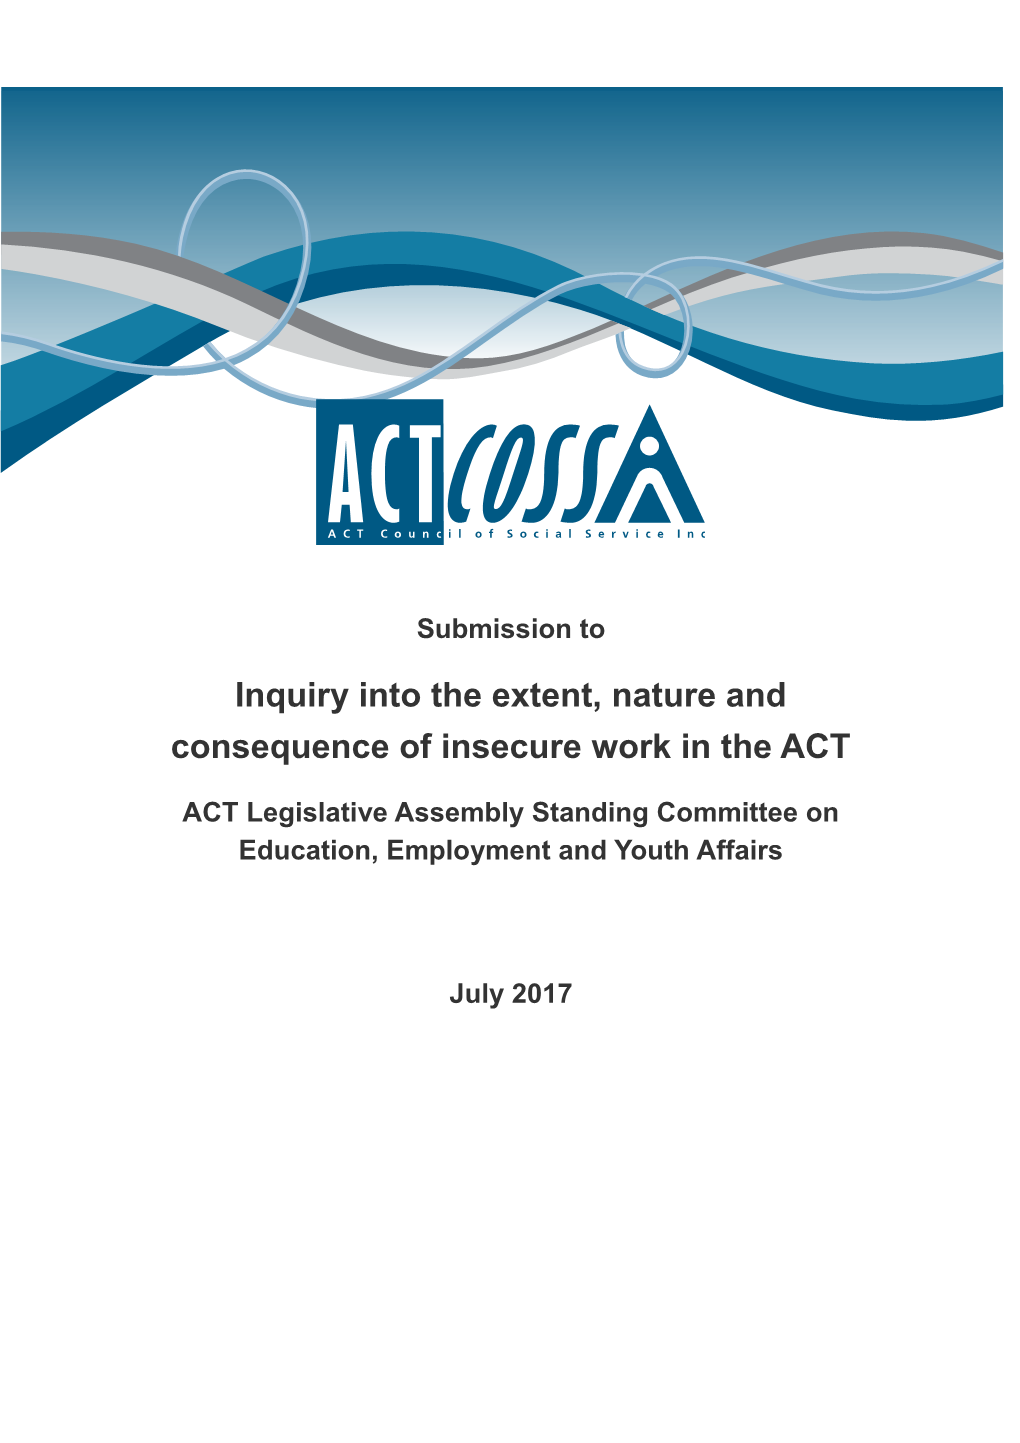 Inquiry Into the Extent, Nature and Consequence of Insecure Work in the ACT